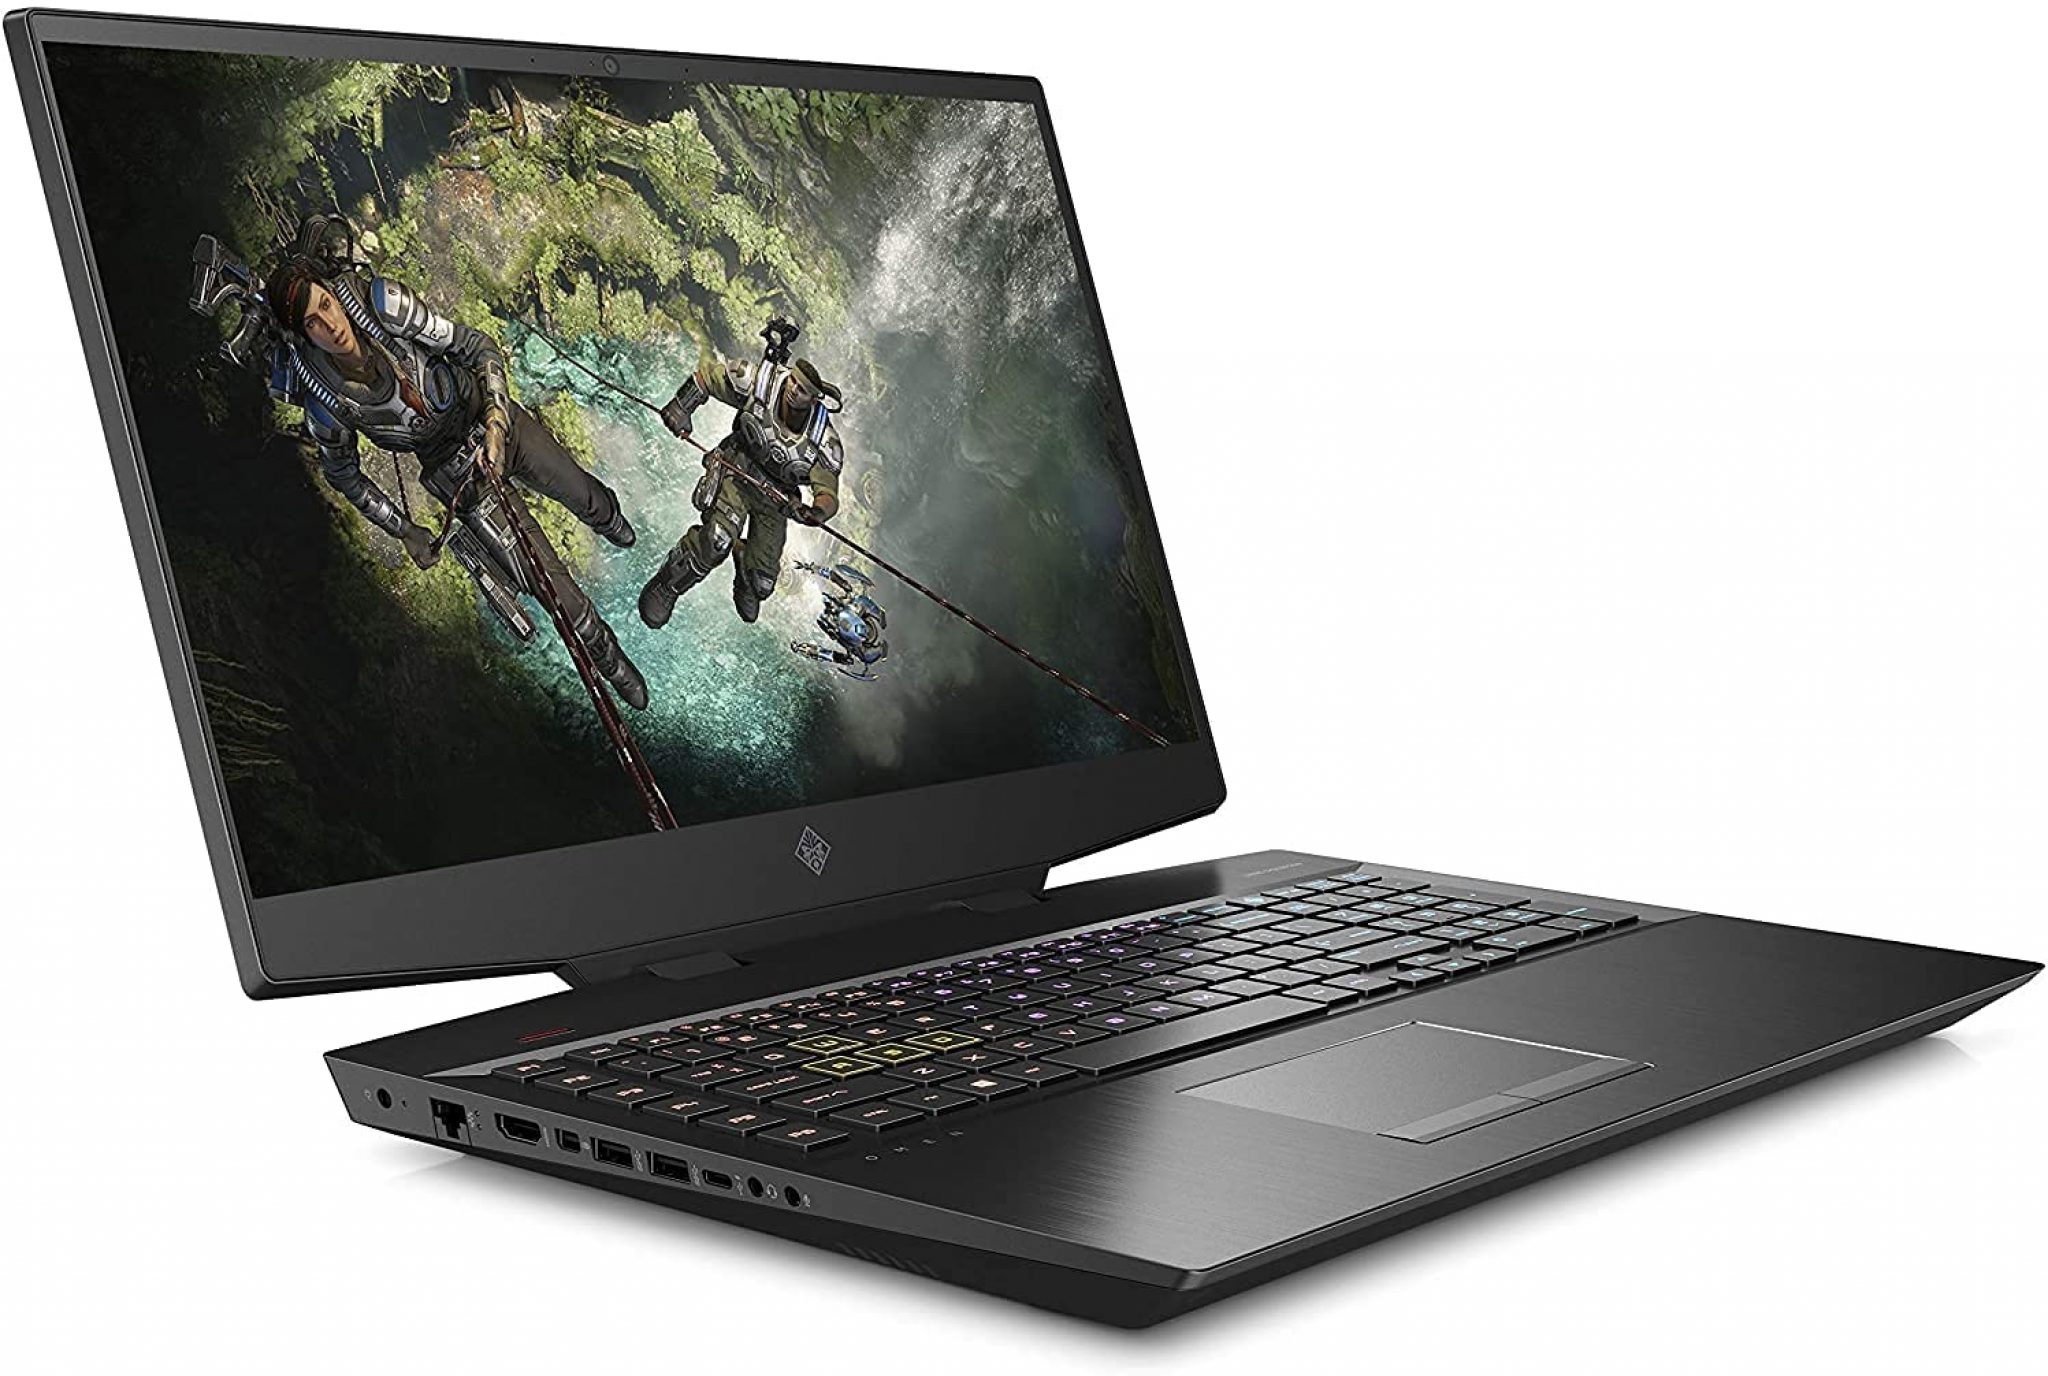 HP OMEN 17 With 17.3 Inch FHD, 144 Hz Gaming Laptop, Intel Core i7